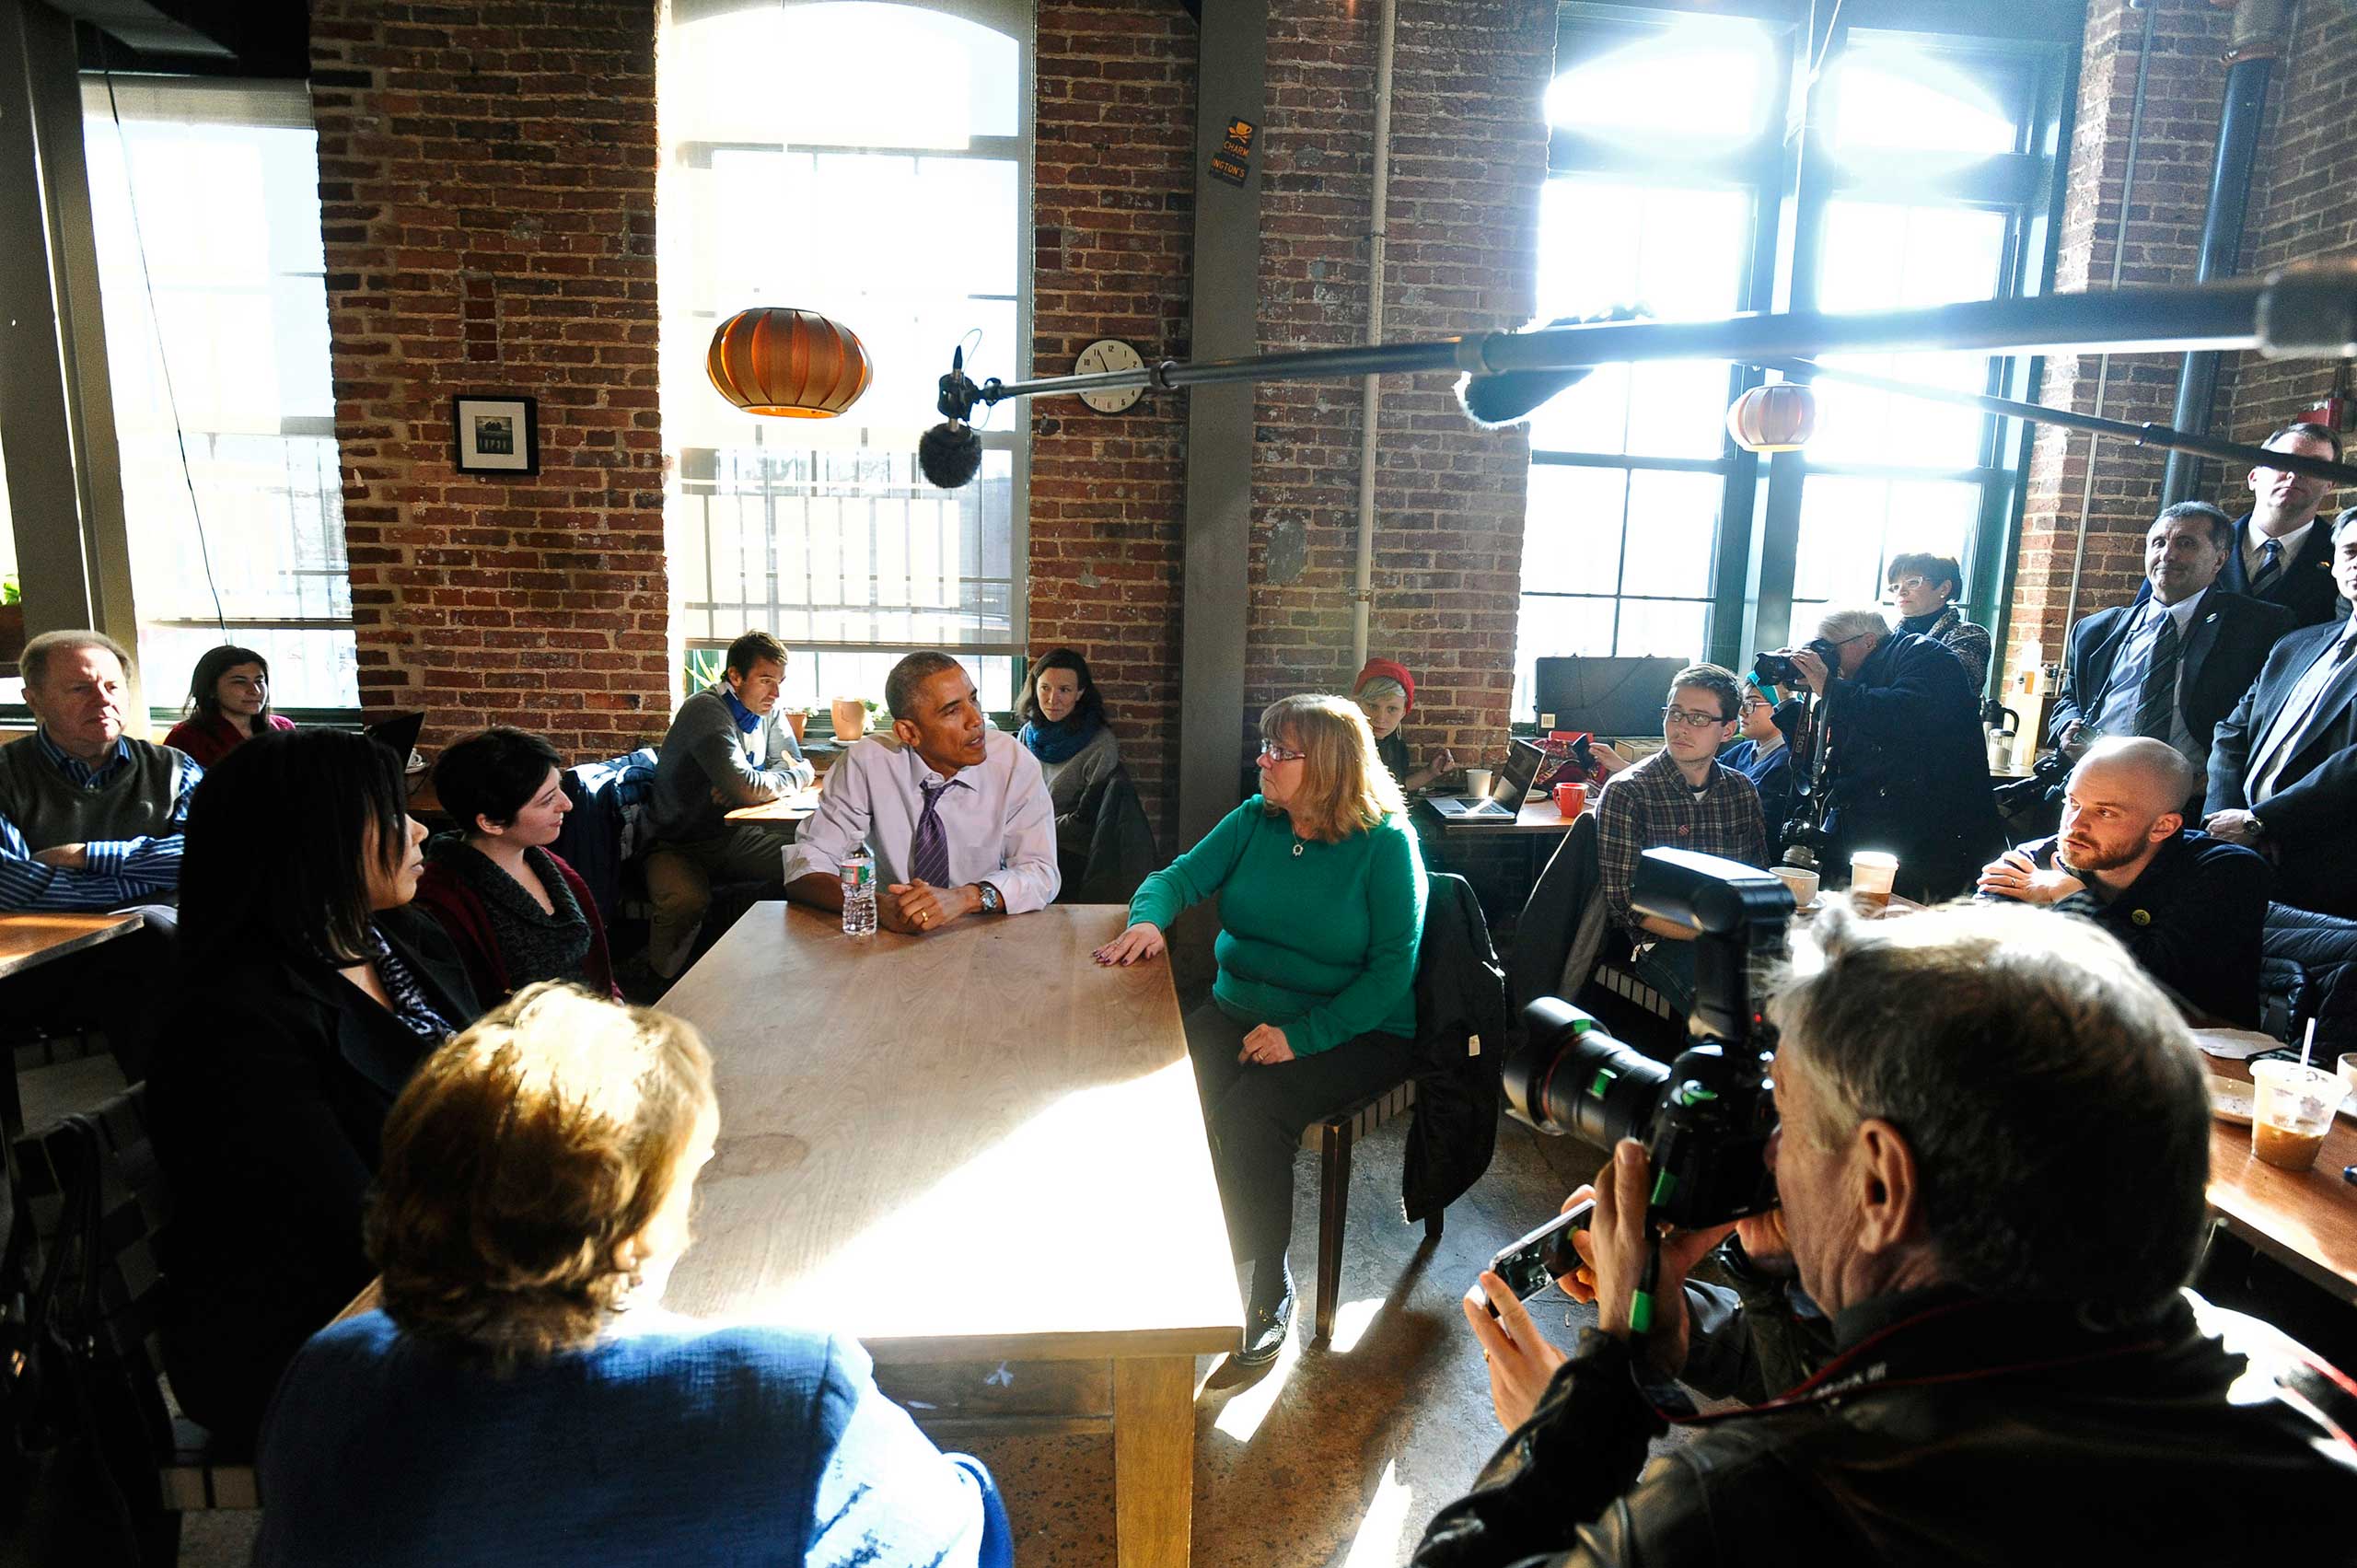 President Barack Obama eats lunch at Charmington's Cafe with Vika Jordan, Amanda Rothschild, and Mary Stein to discuss the needs of all Americans as they balance their families and jobs on Jan. 15, 2015 in Baltimore. (Kenneth K. Lam—Baltimore Sun/TNS/Getty Images)